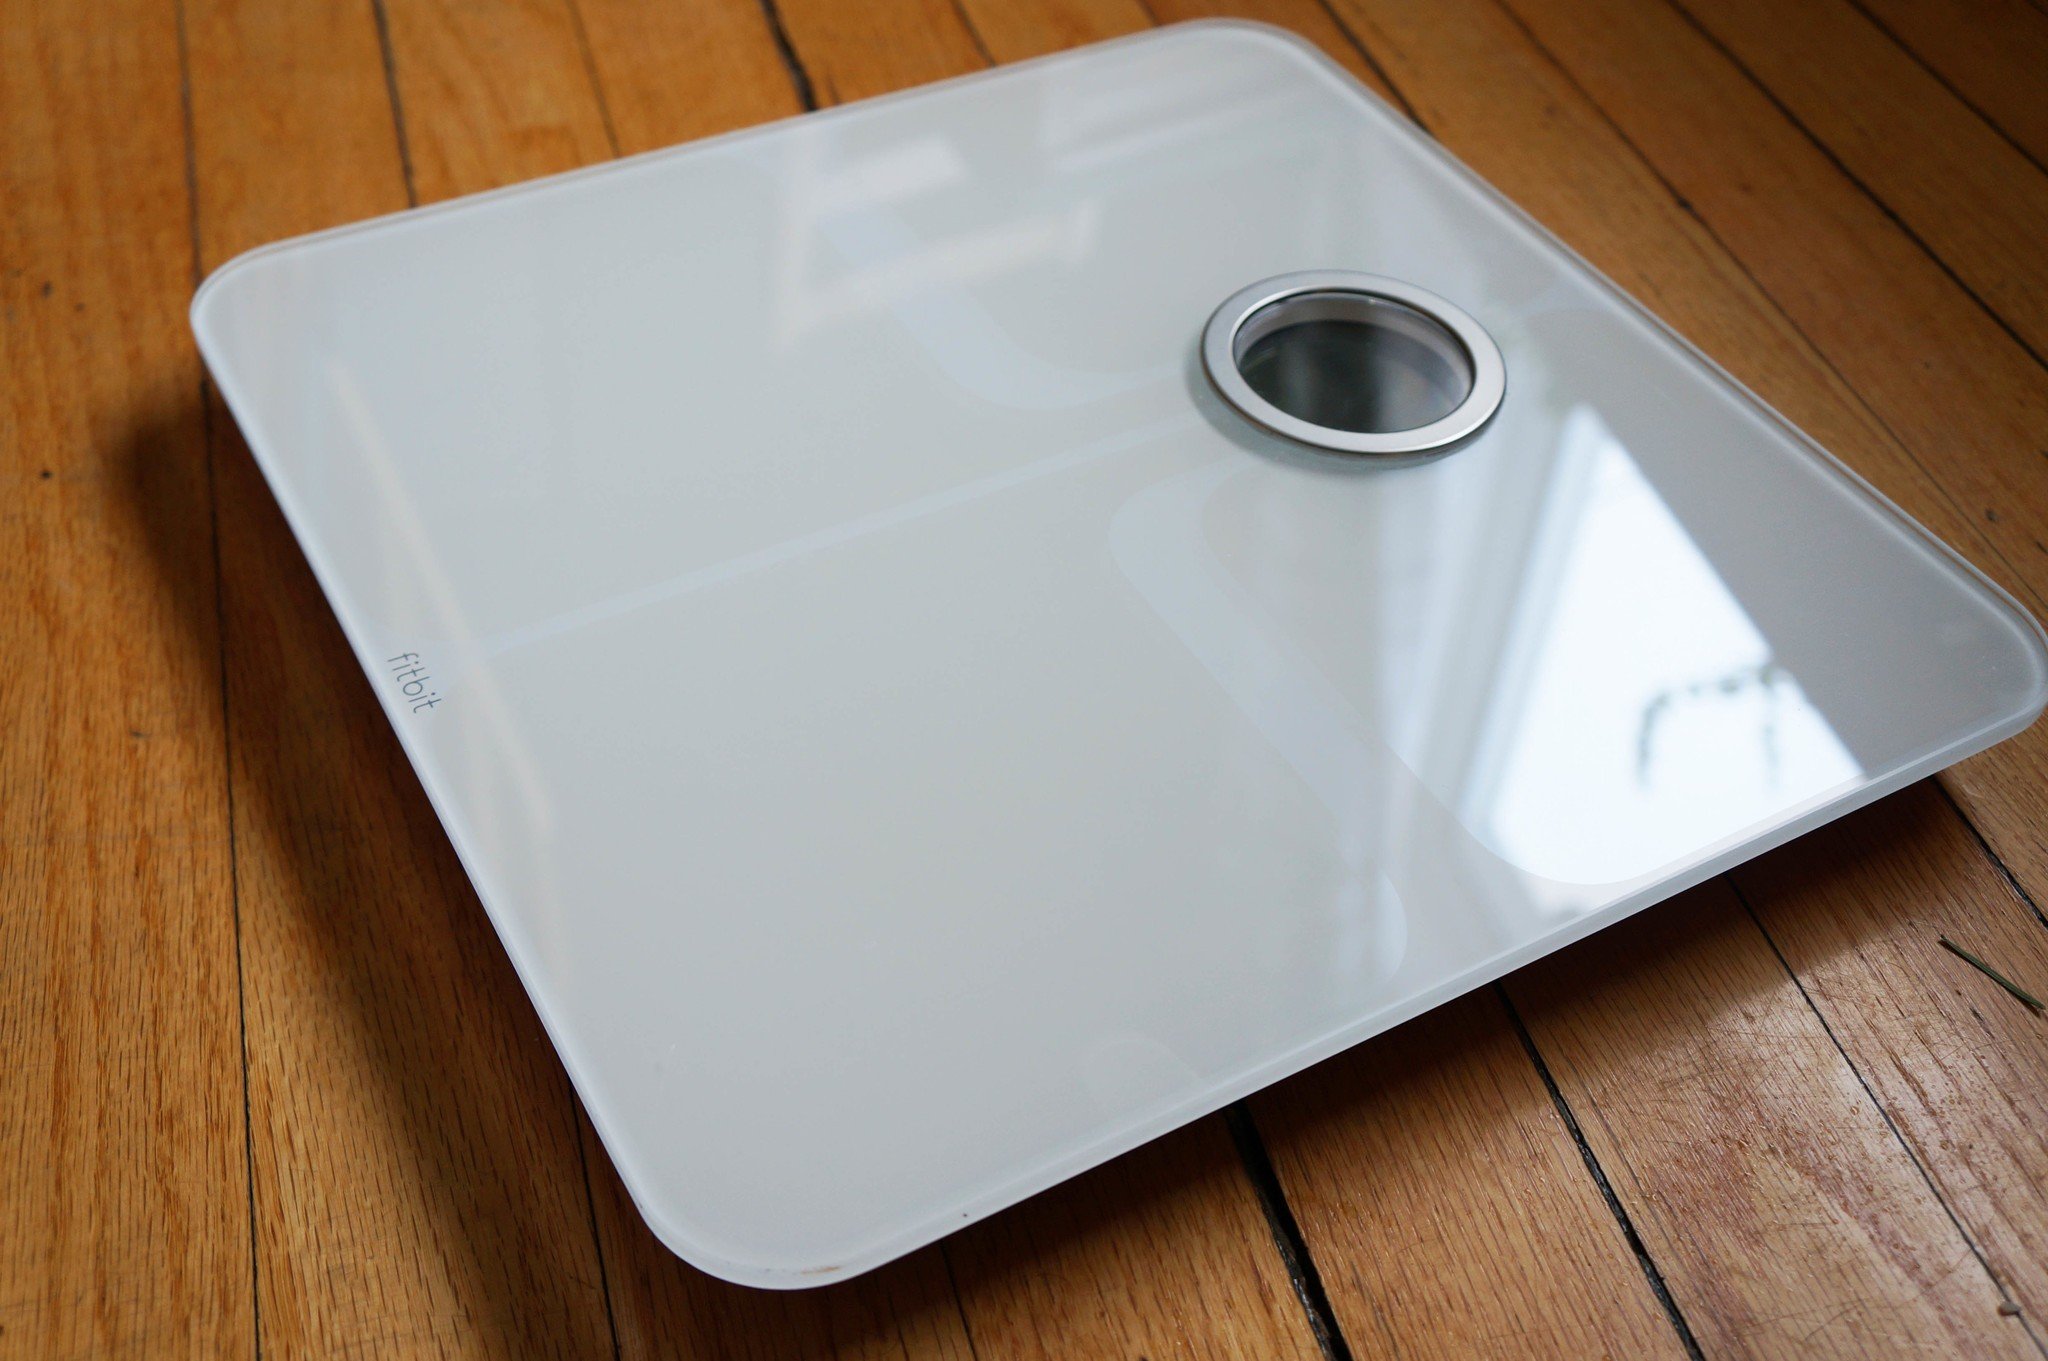 fitbit aria 2 scale review